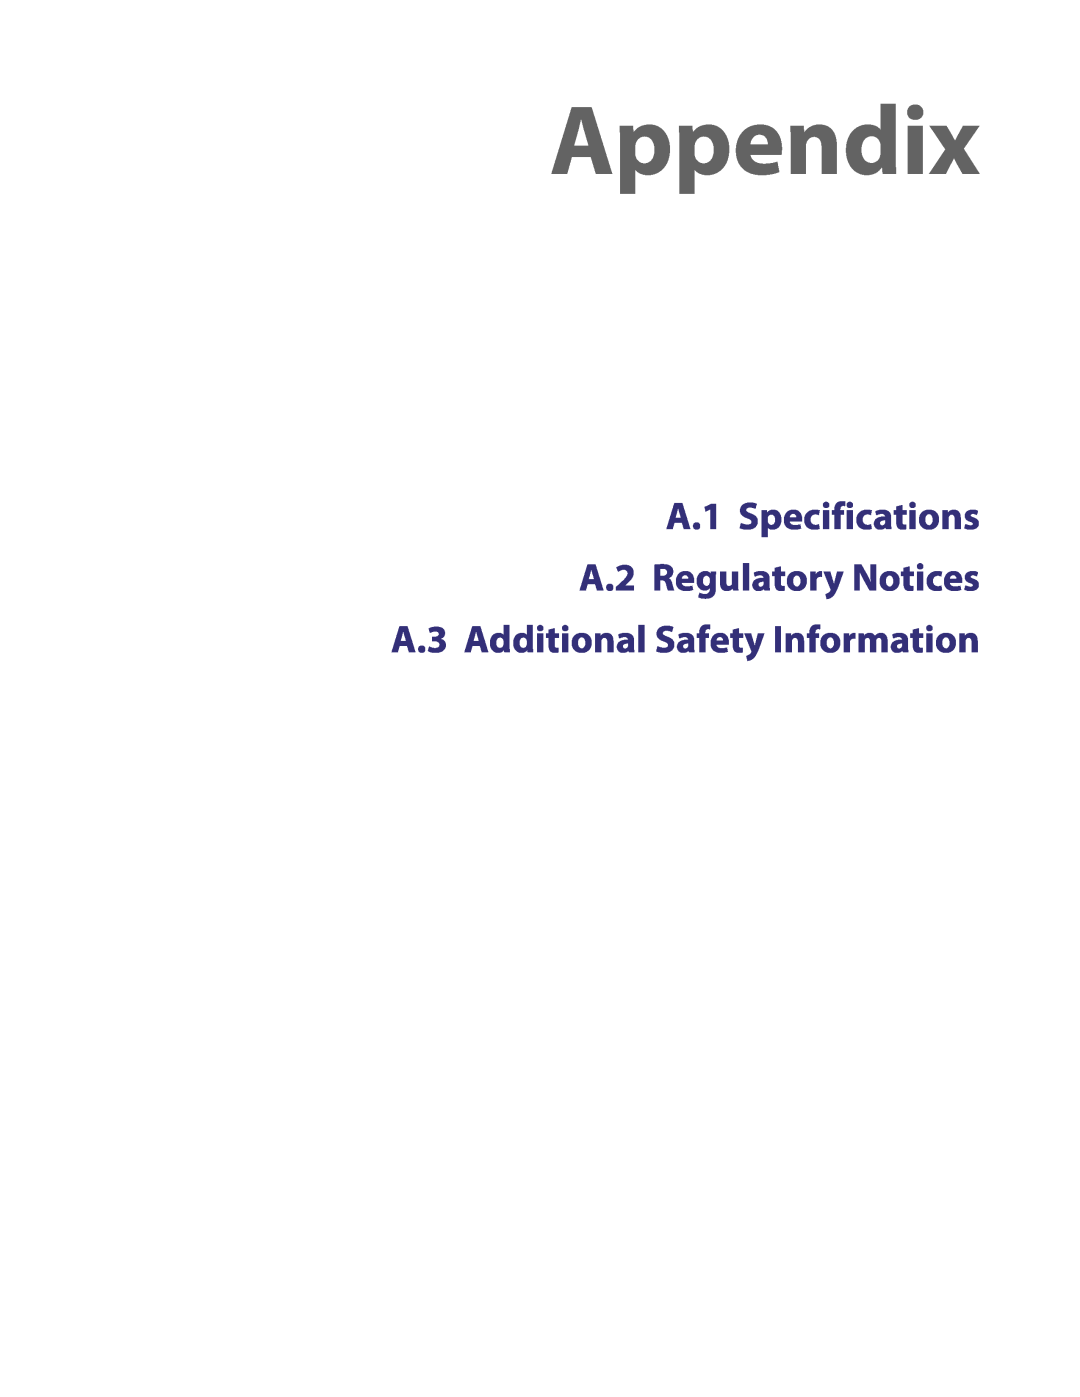 HTC PDA Phone user manual Appendix, A.1 Specifications A.2 Regulatory Notices, A.3 Additional Safety Information 